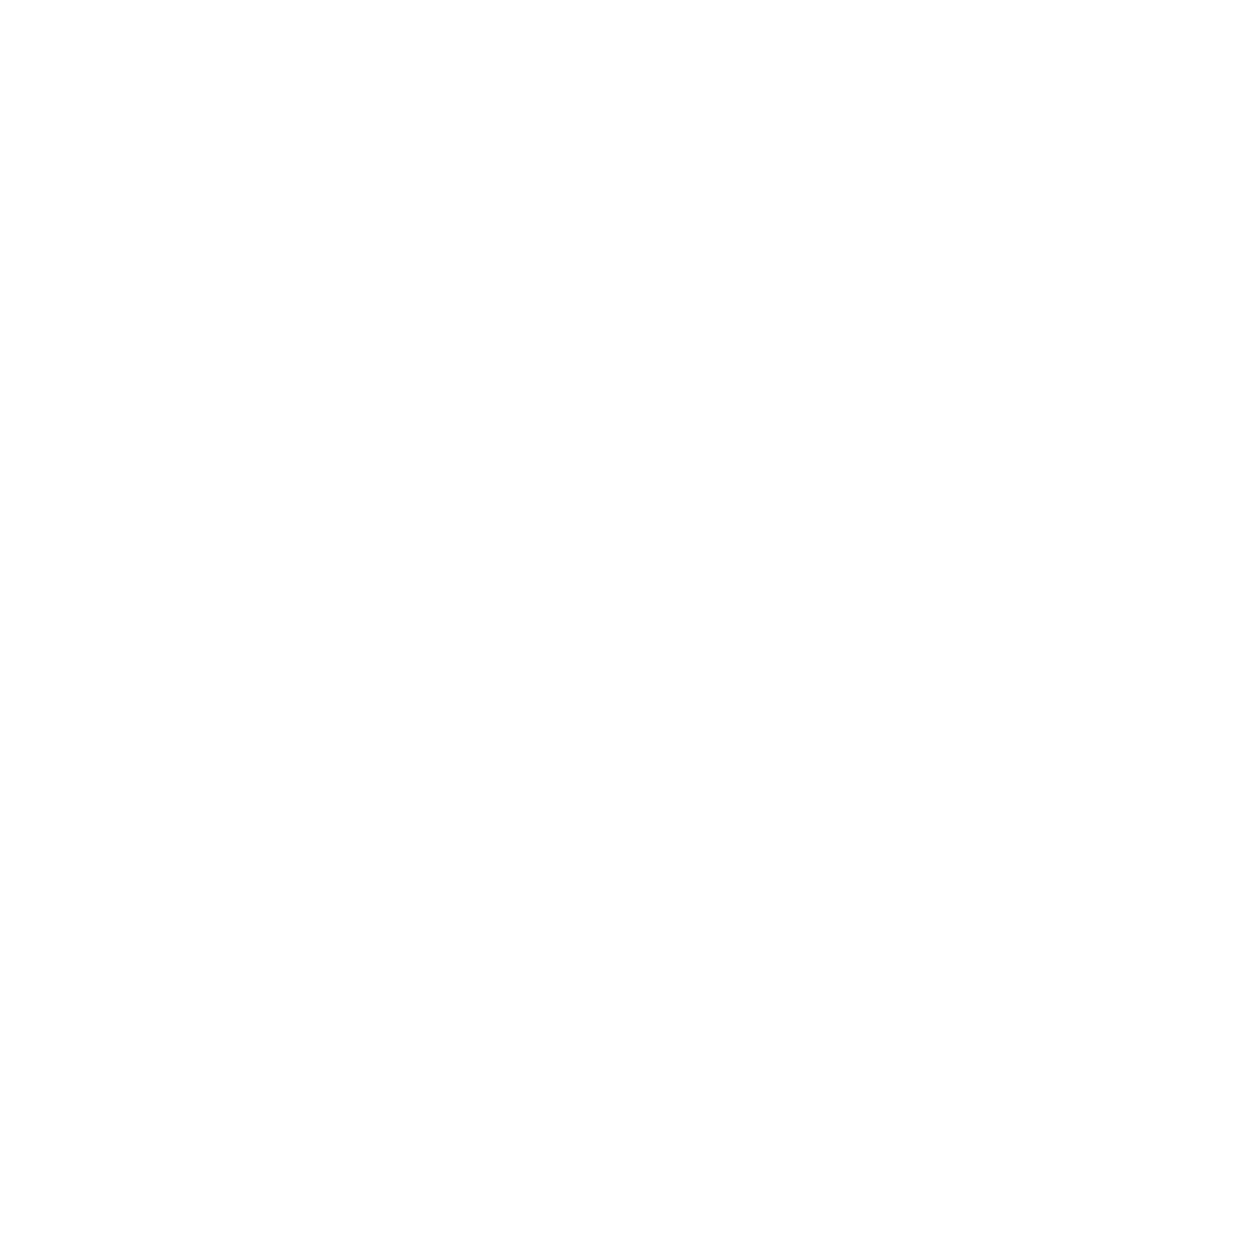 Knotted Tree Studios